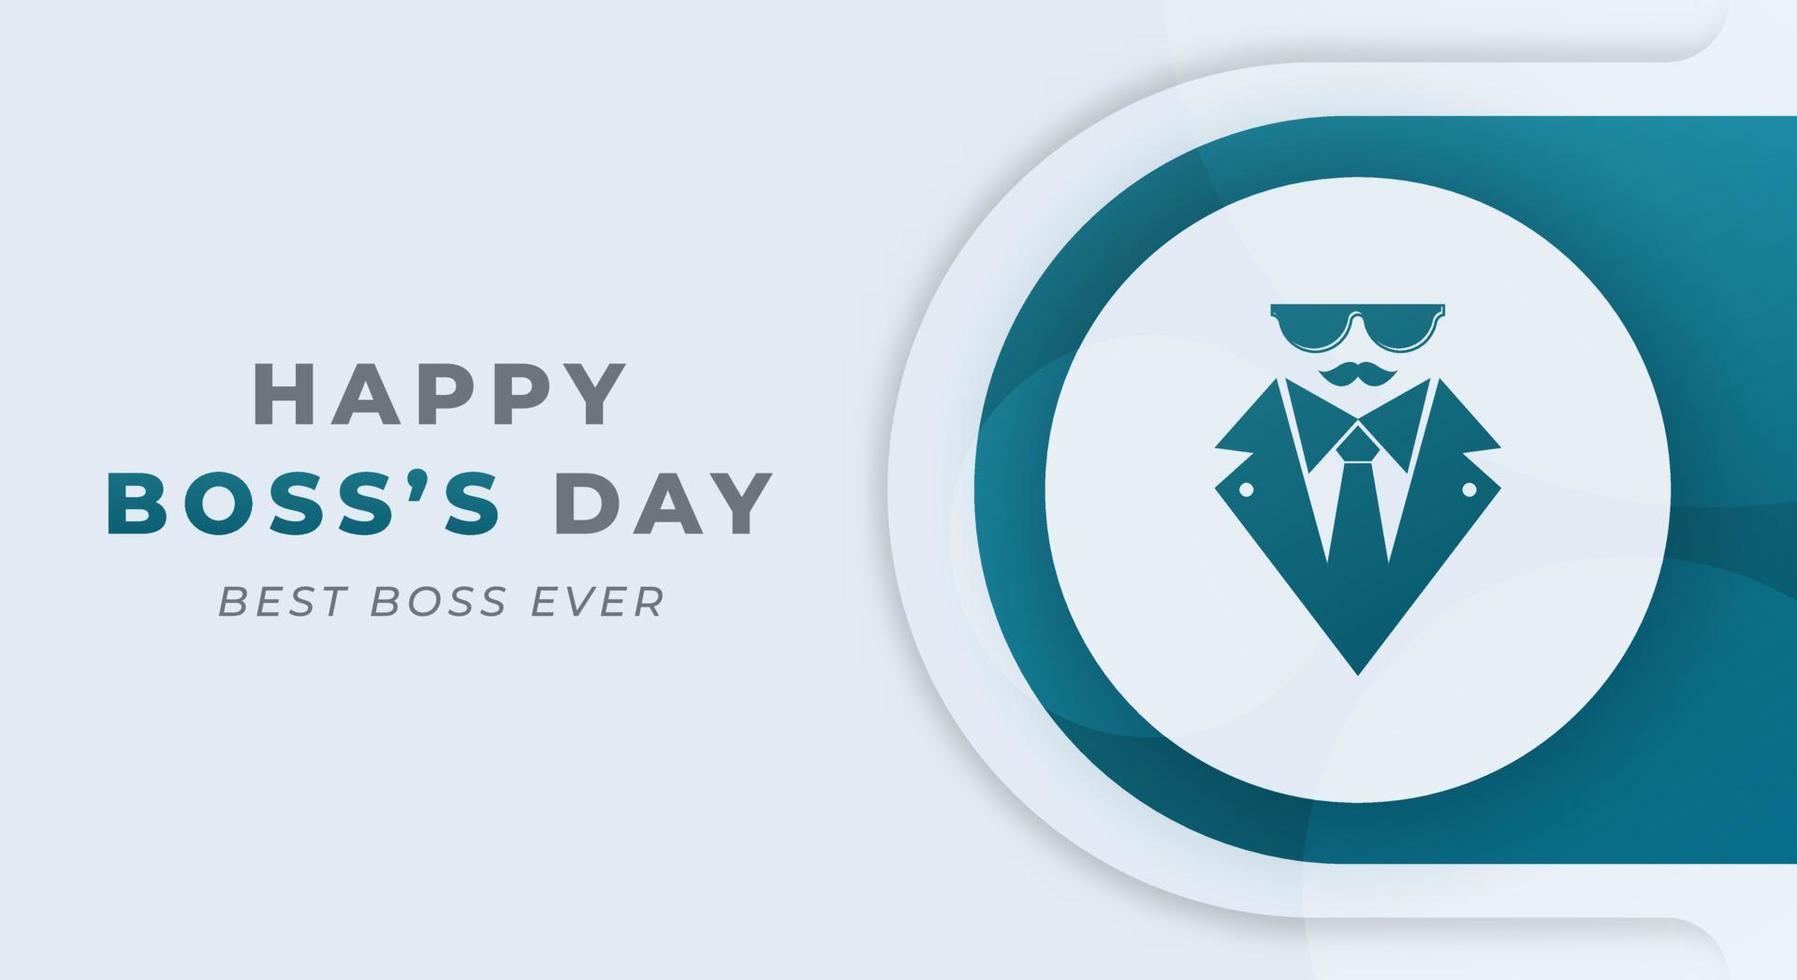 Happy Boss's Day Celebration Vector Design Illustration. Template for Background, Poster, Banner, Advertising, Greeting Card or Print Design Element